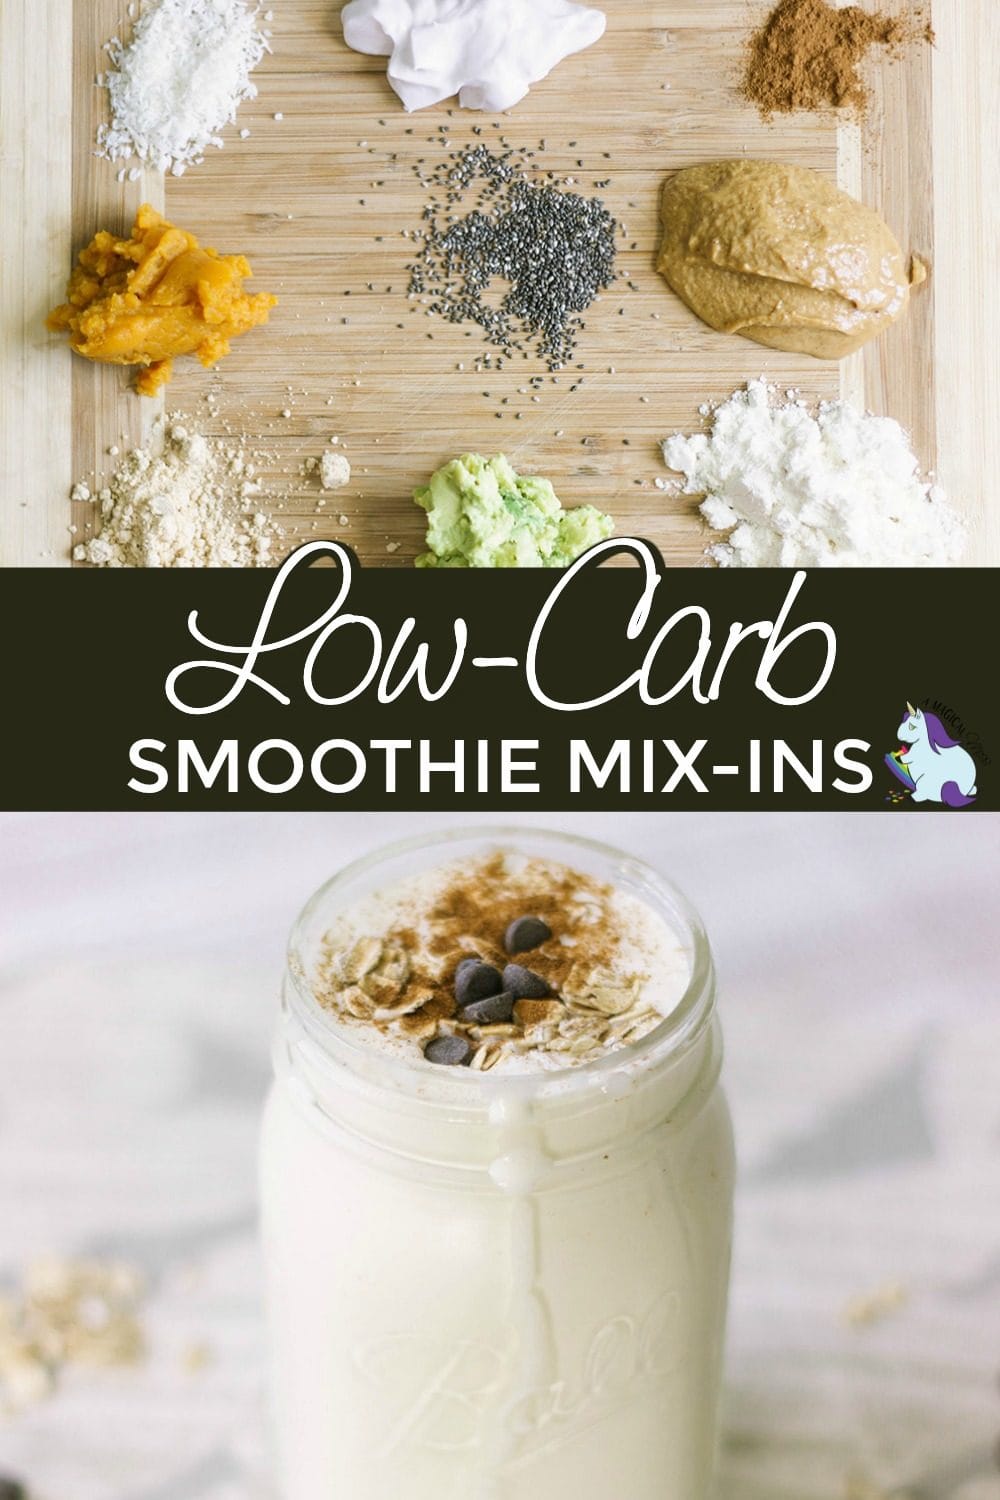 Low-carb smoothie mix-in ideas.